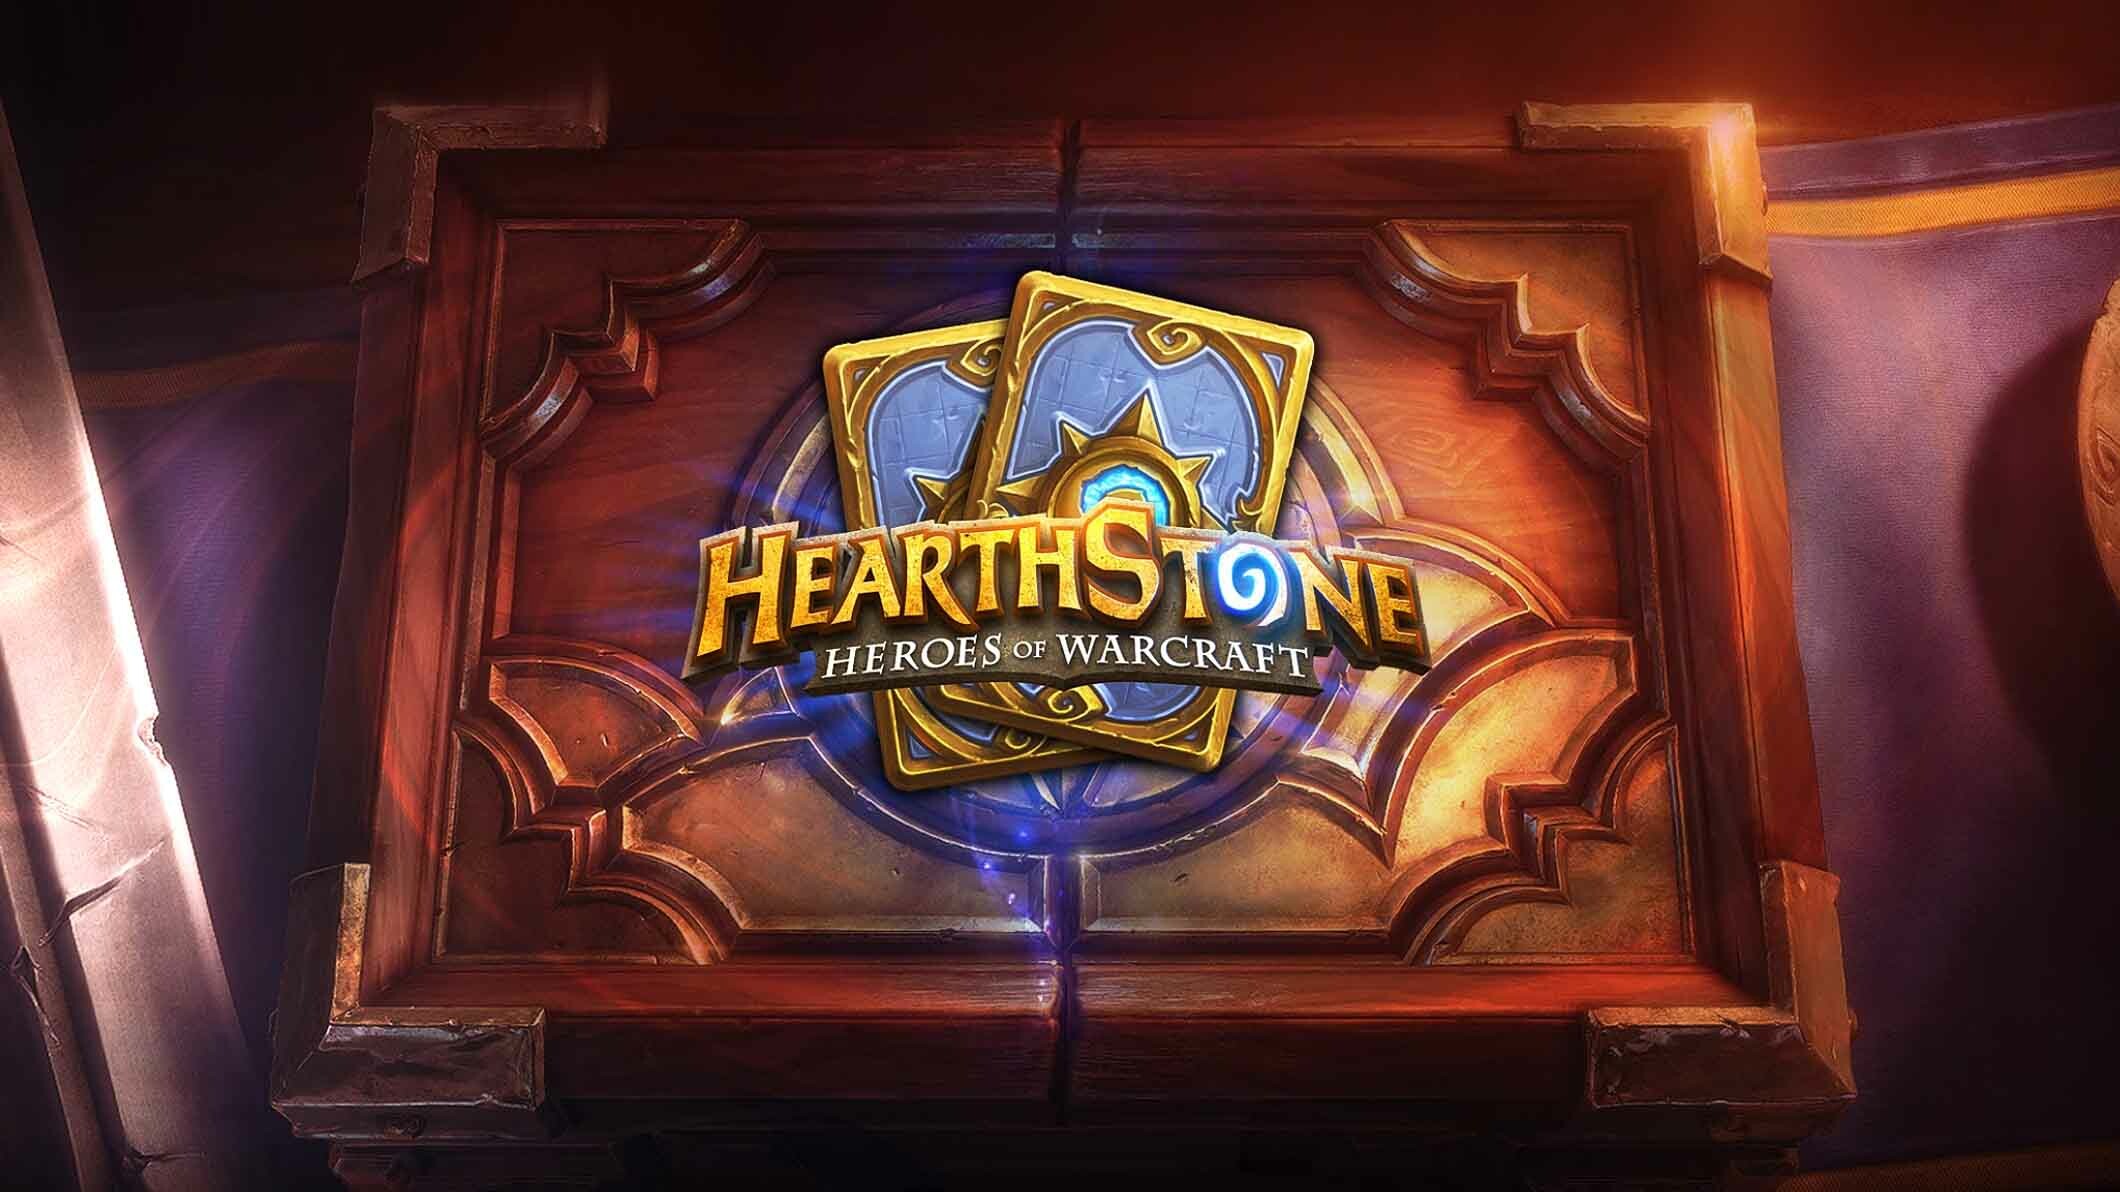 Hearthstone: Players start the game with a substantial collection of 'basic' cards but can gain rarer and more powerful cards through purchasing packs of additional cards, or as a reward for competing in the Arena. 2120x1200 HD Wallpaper.